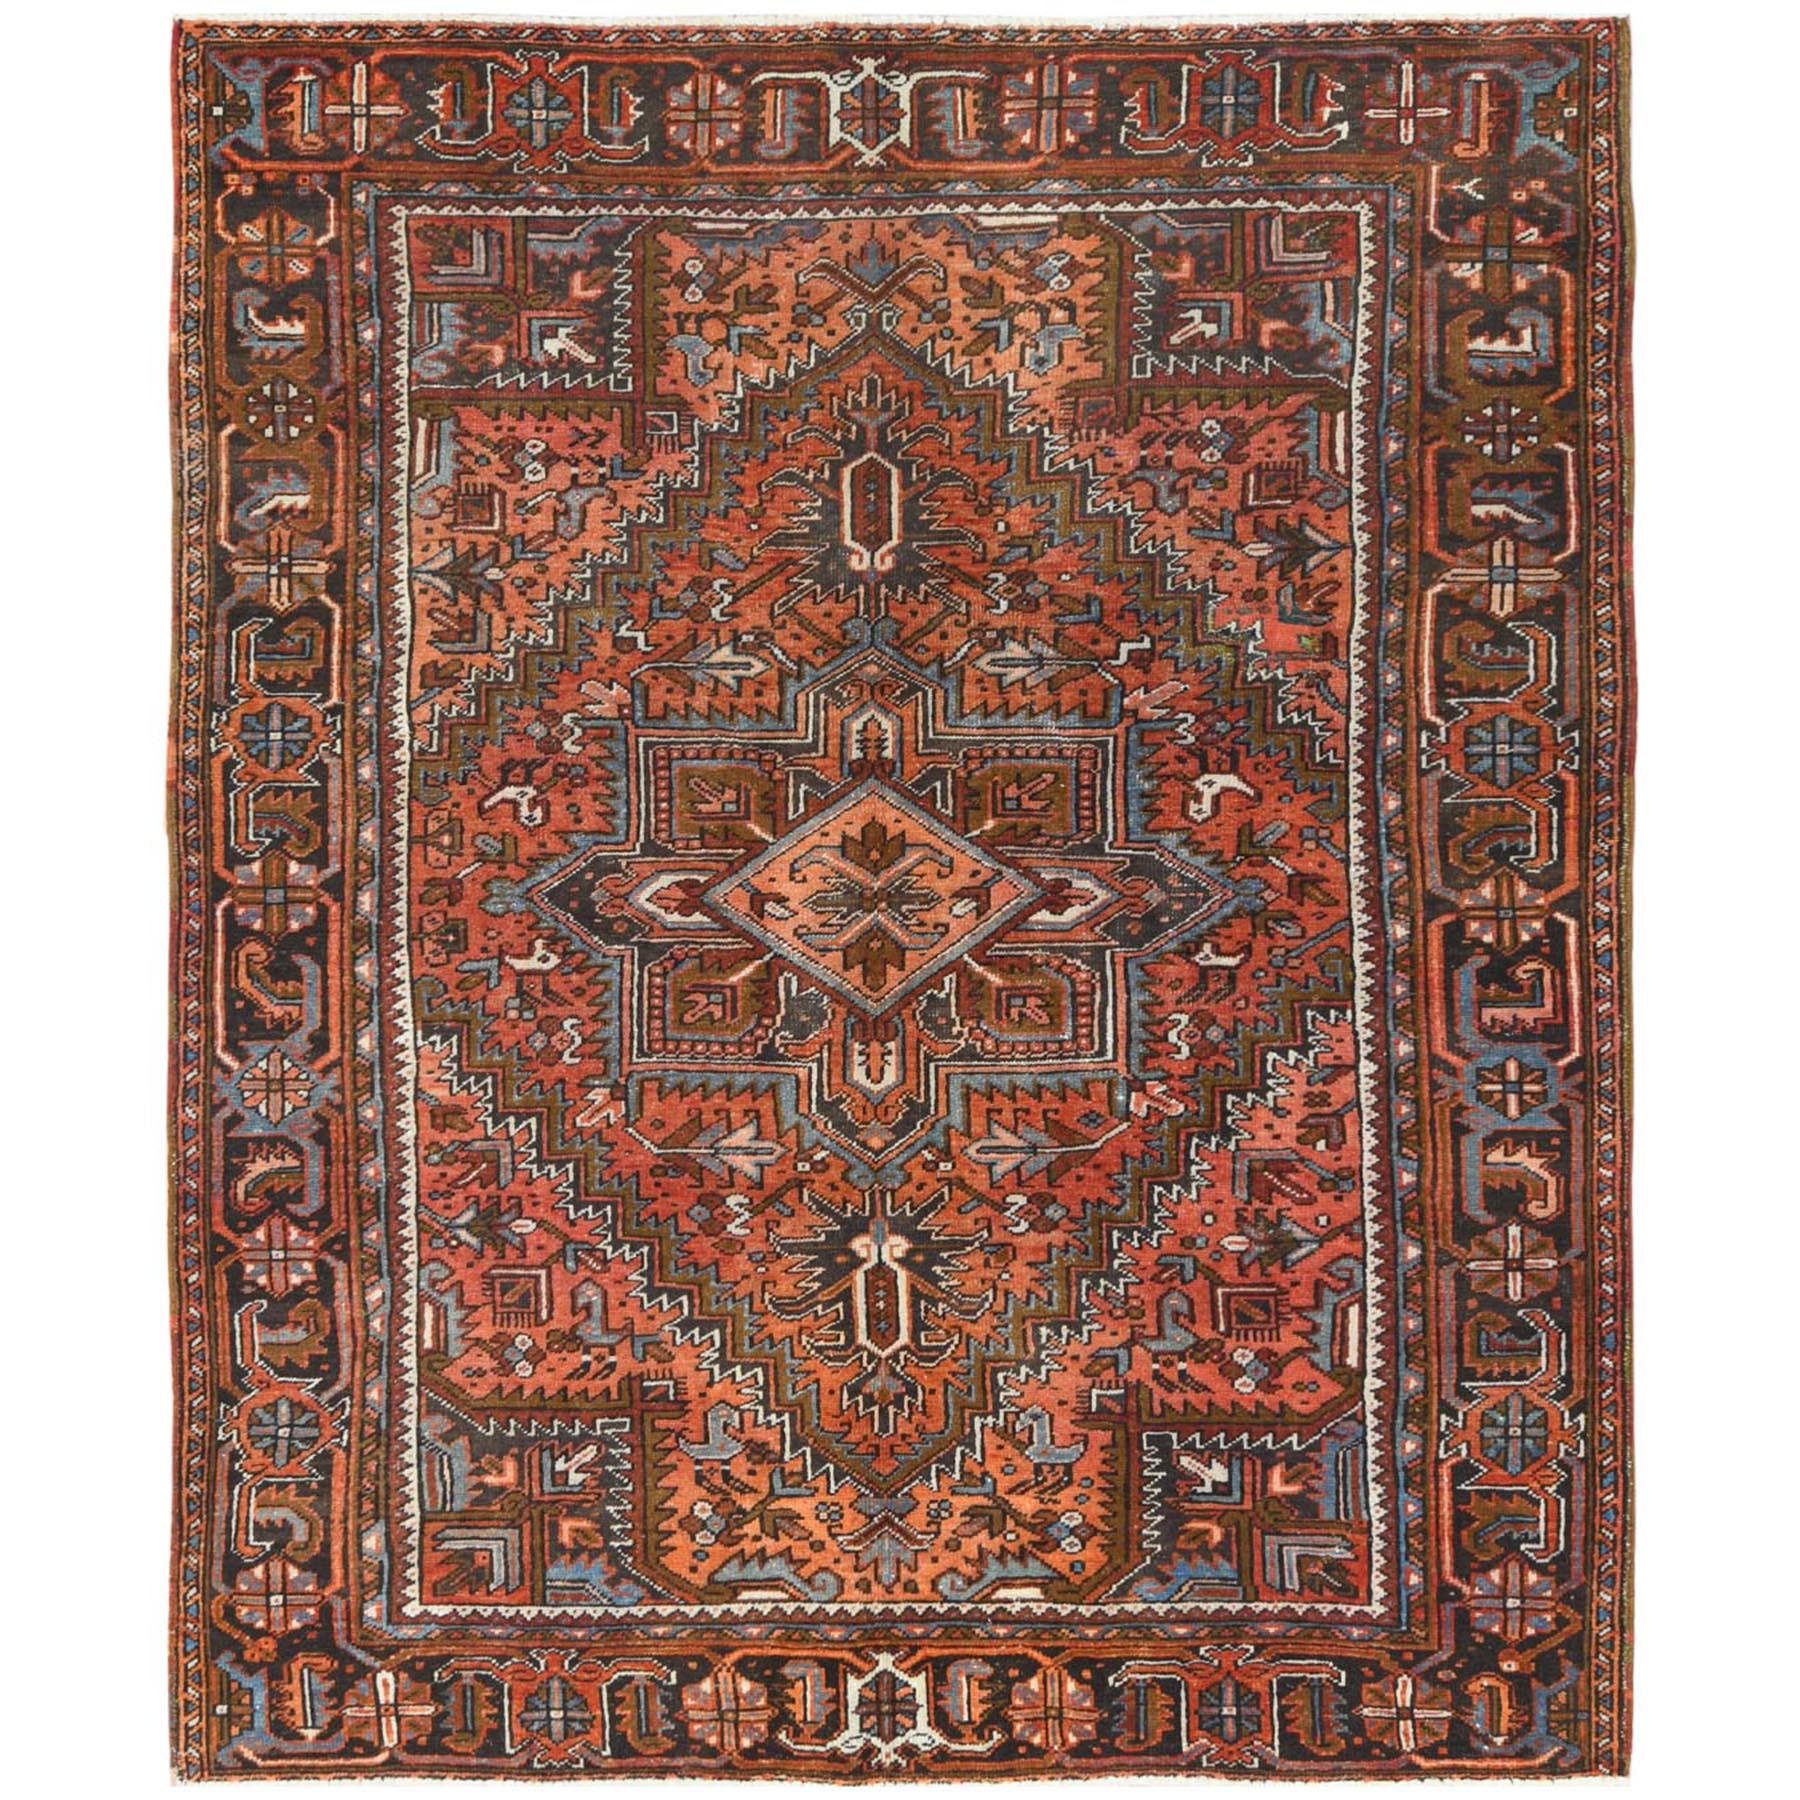  Wool Hand-Knotted Area Rug 7'6